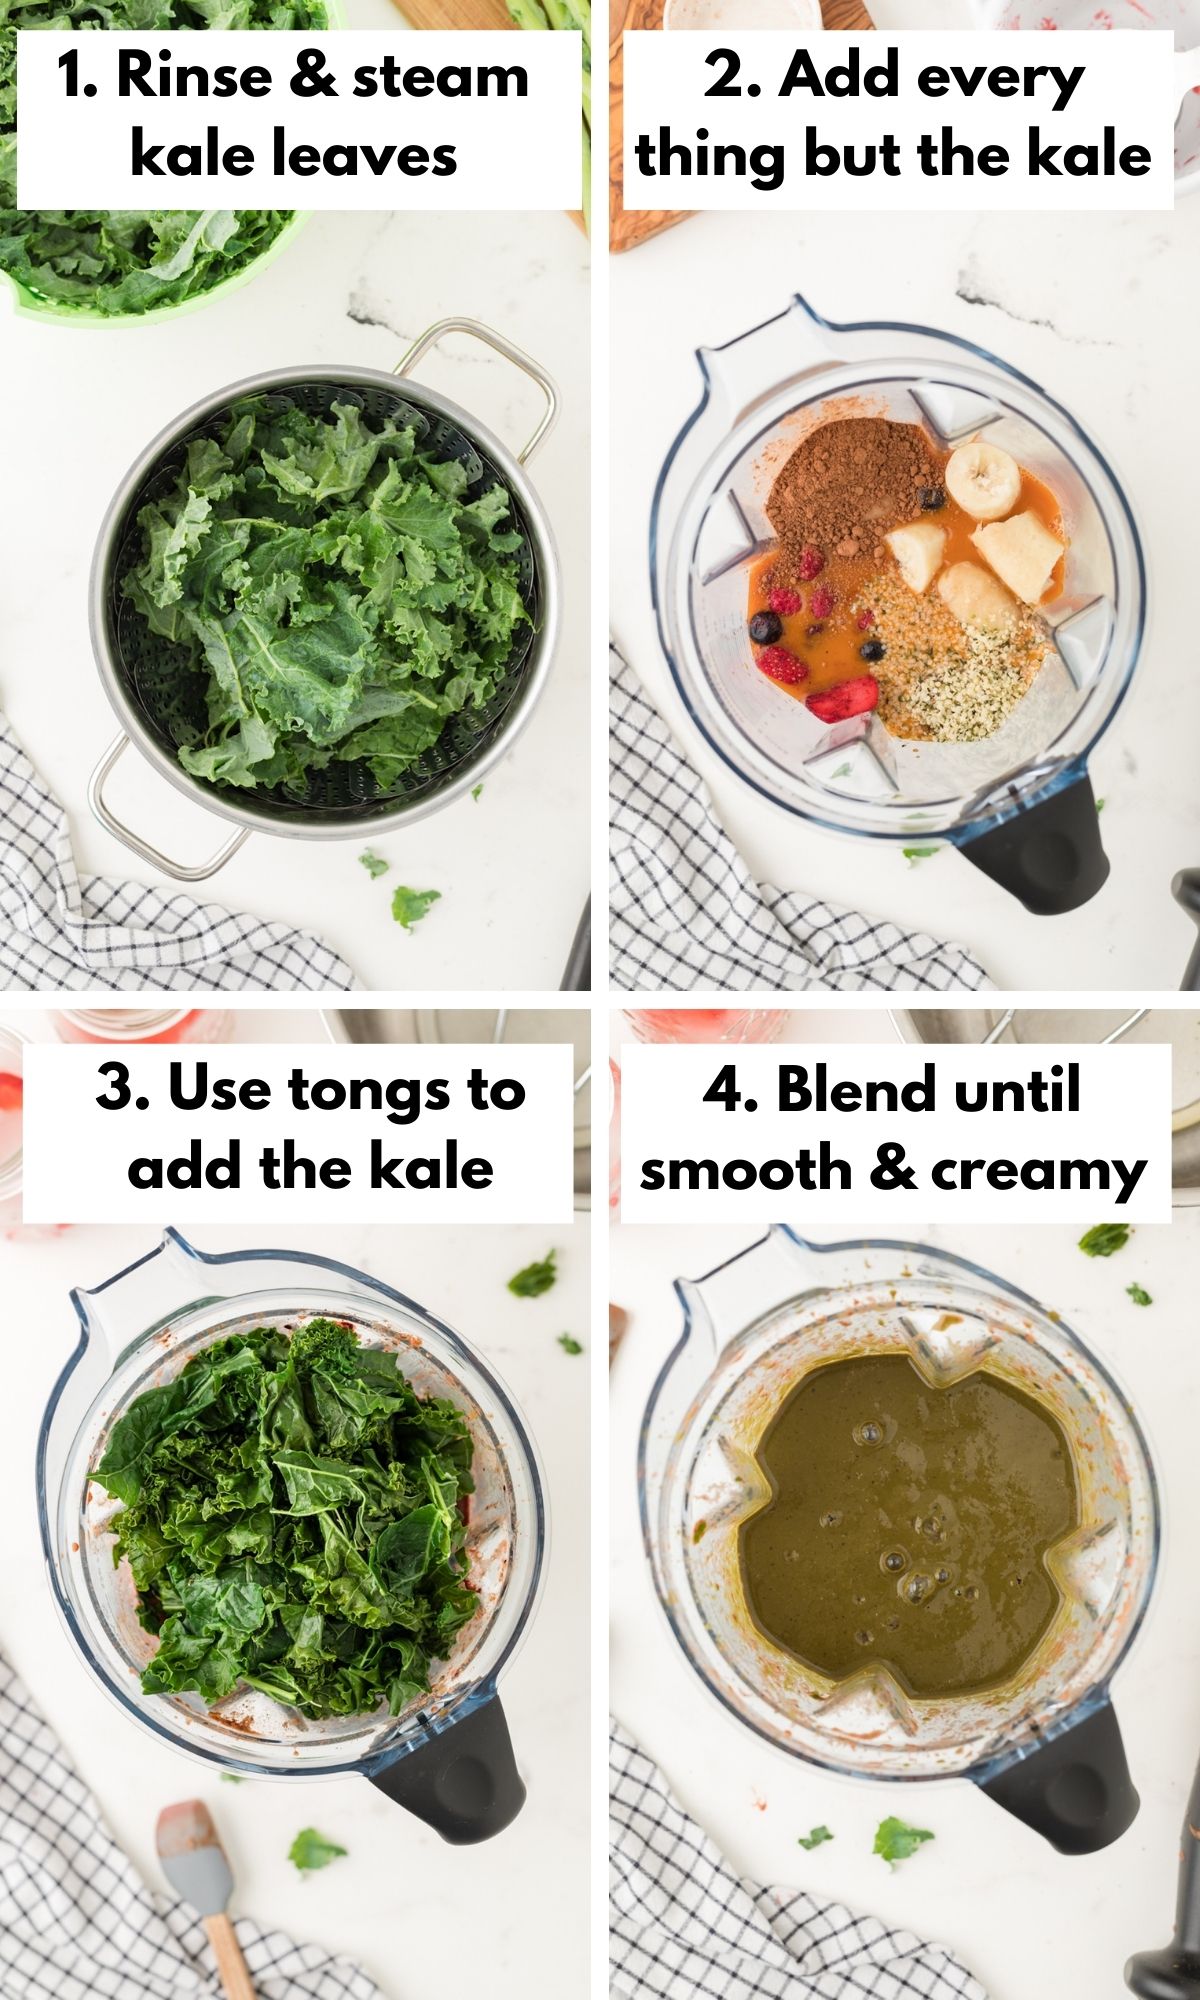 How to make a chocolate kale smoothie